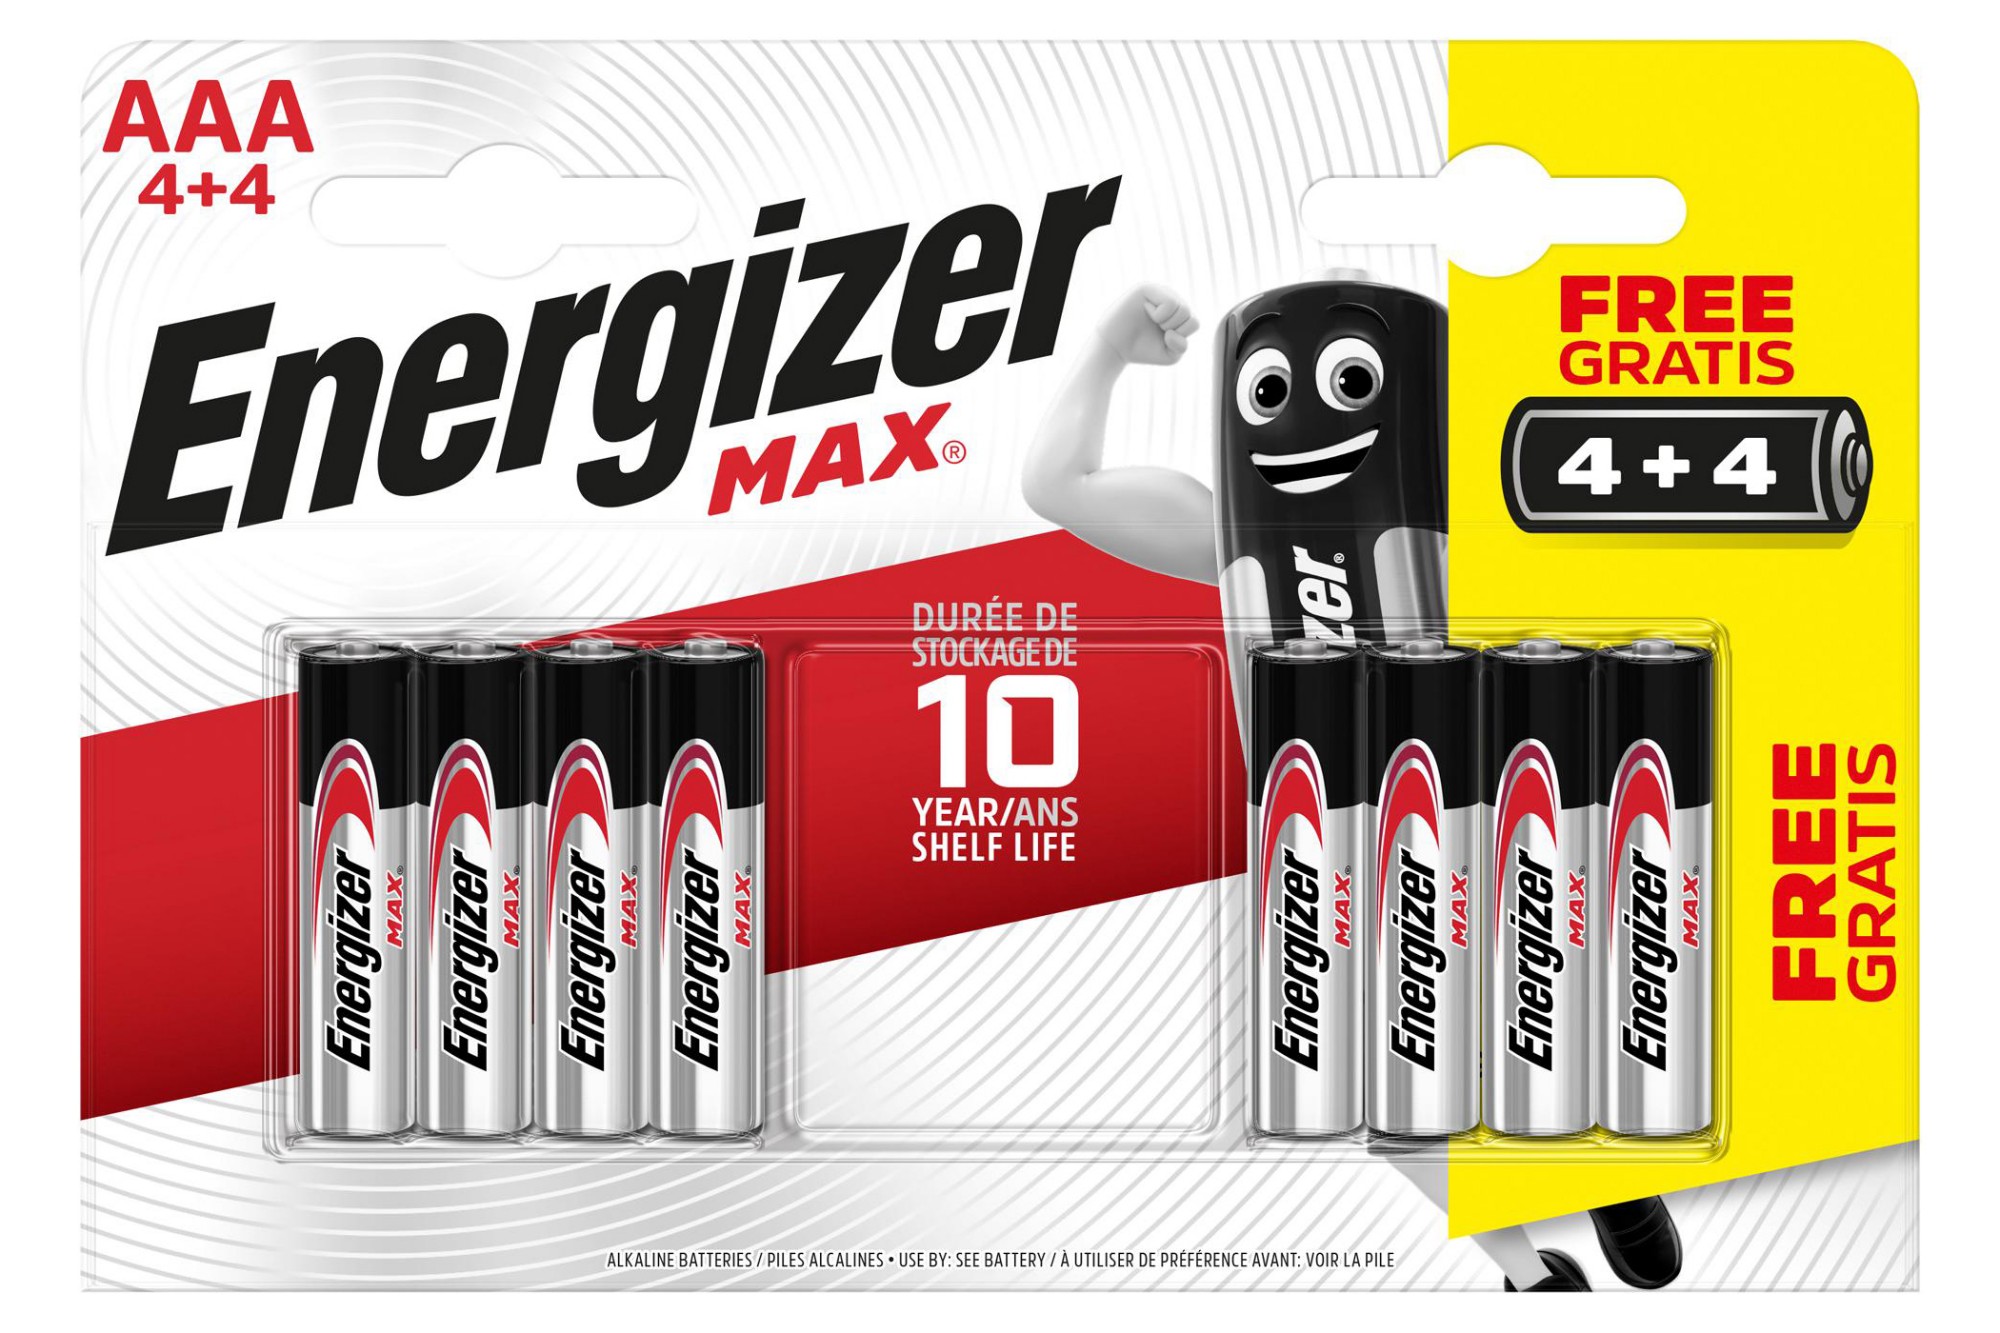 E301533900 ENERGIZER Max AAA Alkaline Batteries - Pack of 8